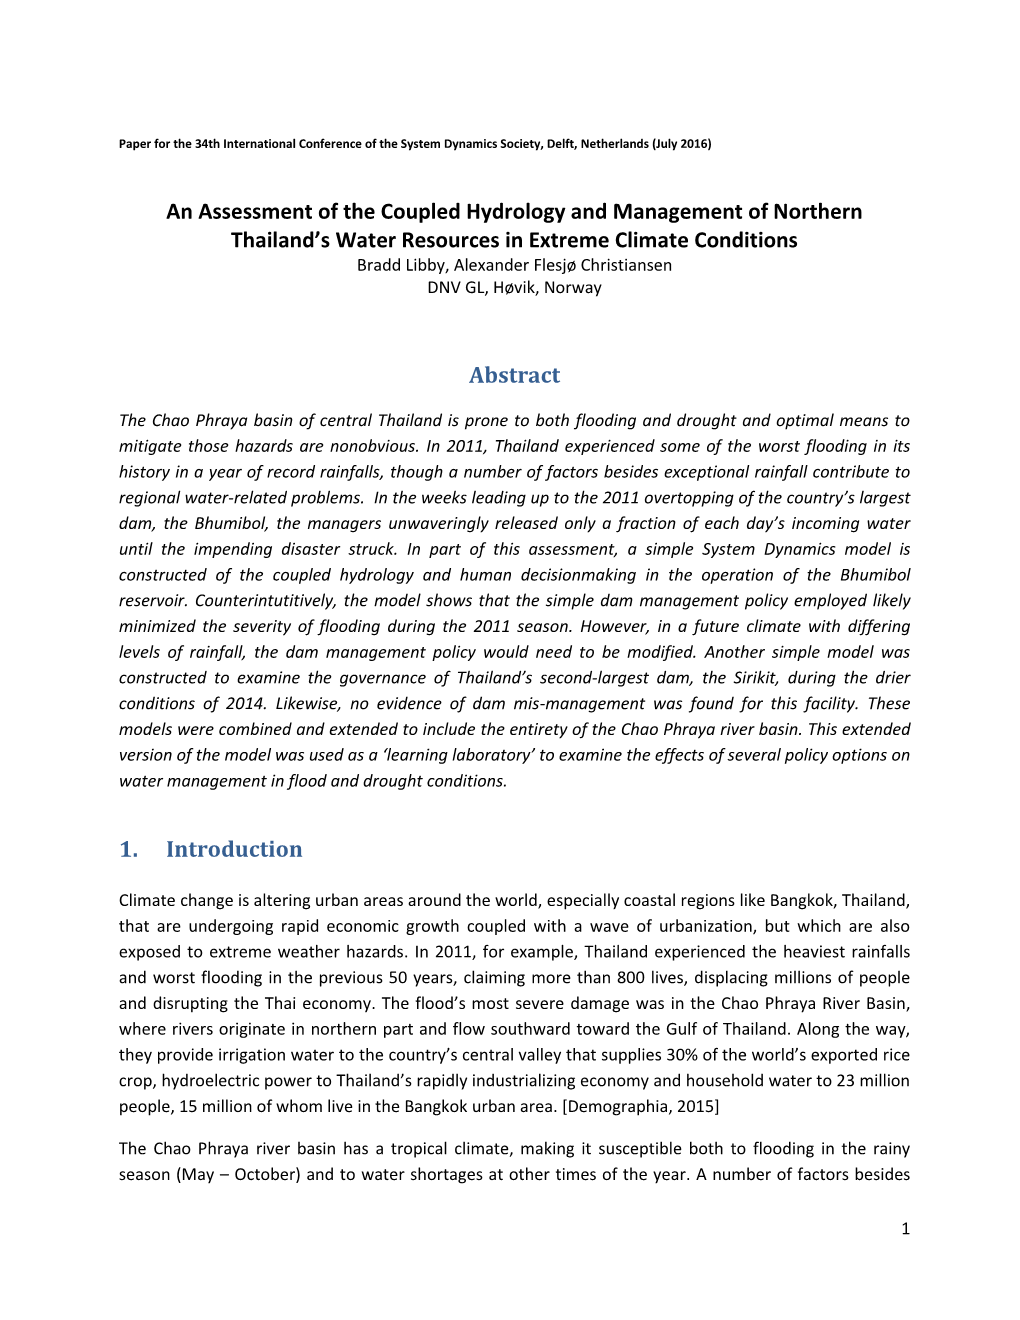 An Assessment of the Coupled Hydrology and Management Of